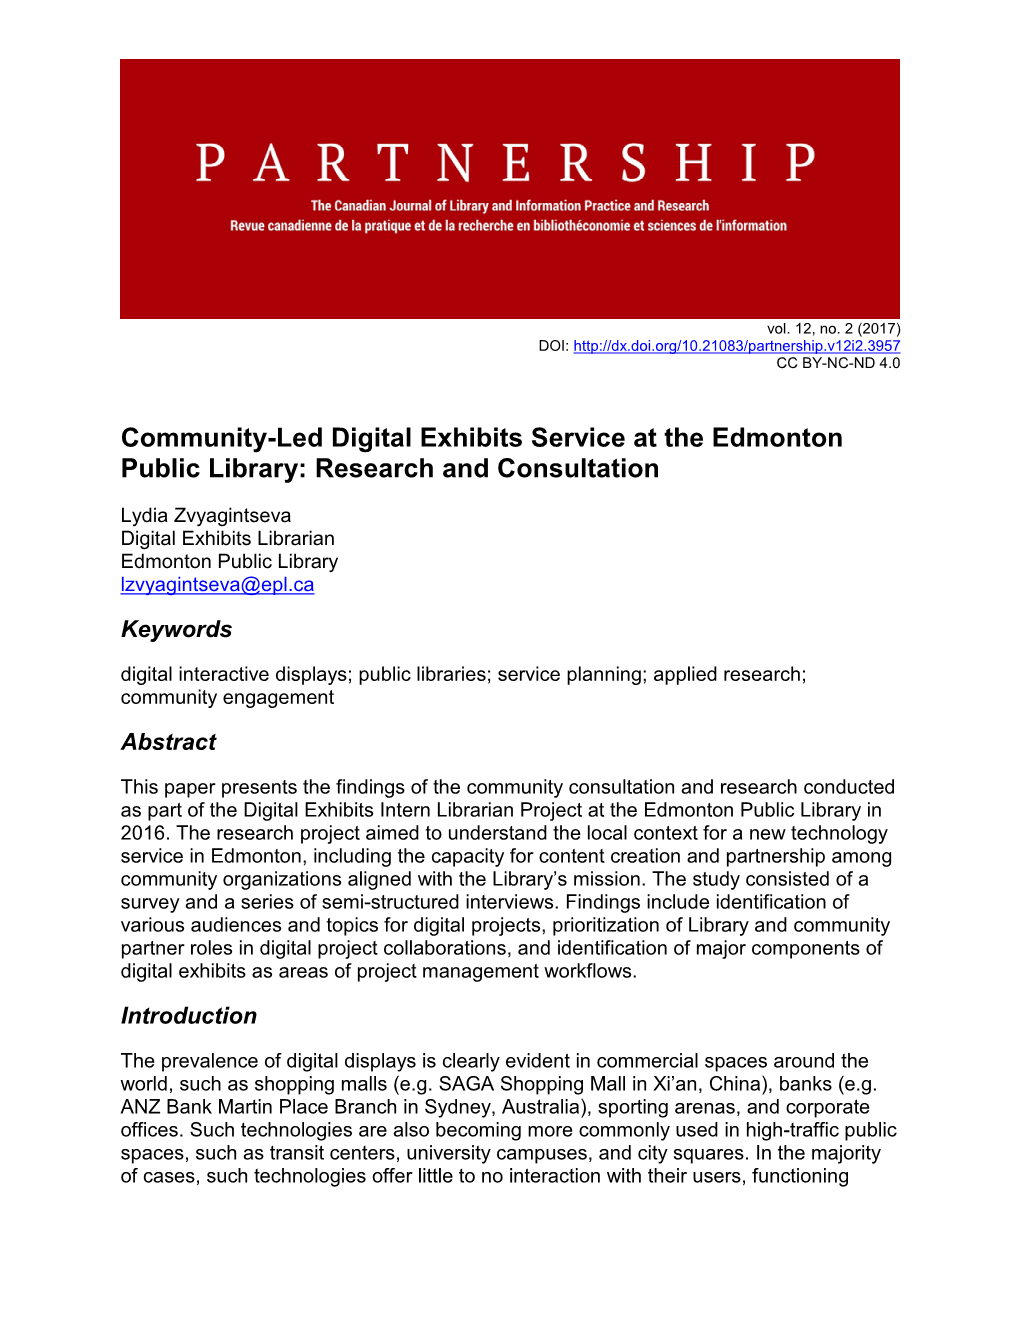 Community-Led Digital Exhibits Service at the Edmonton Public Library: Research and Consultation